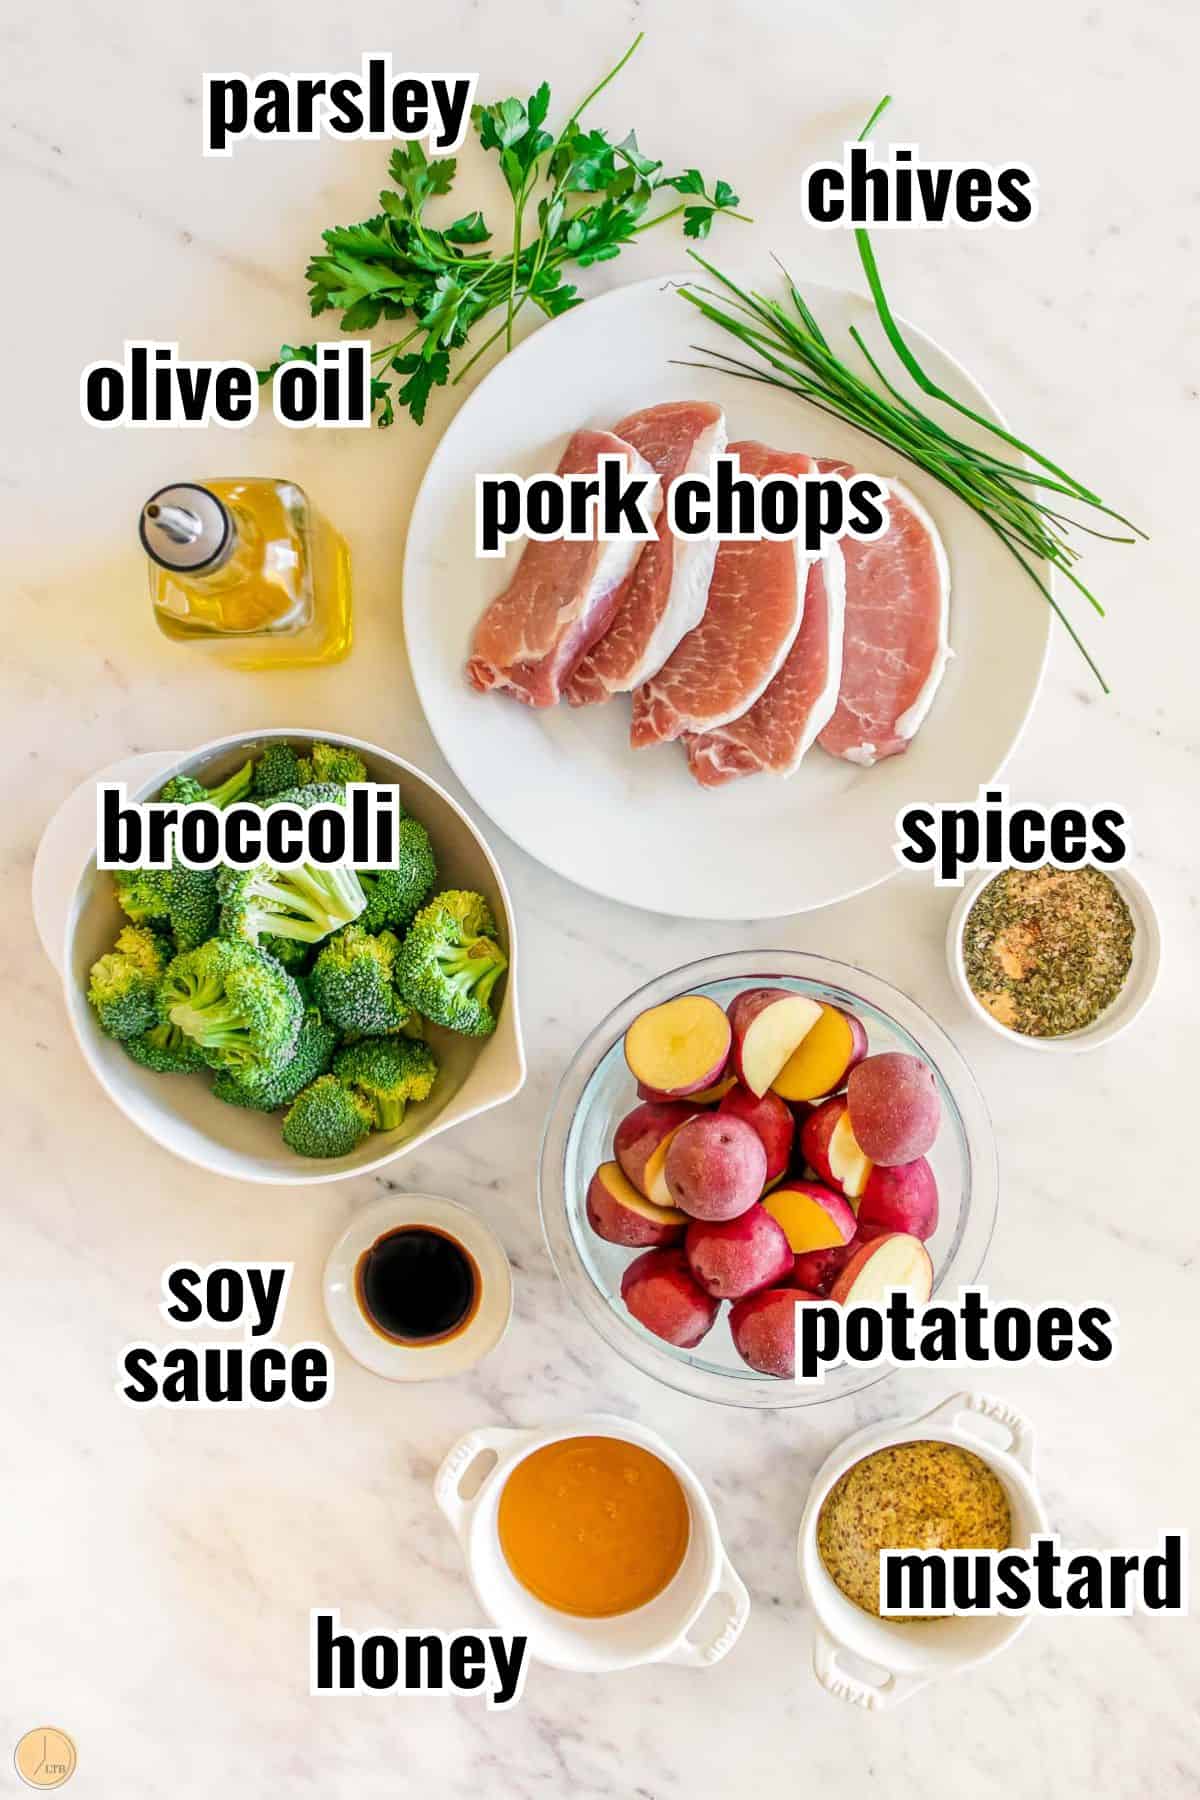 ingredients for a meal that include tender pork chops, whole grain mustard, and herbs.